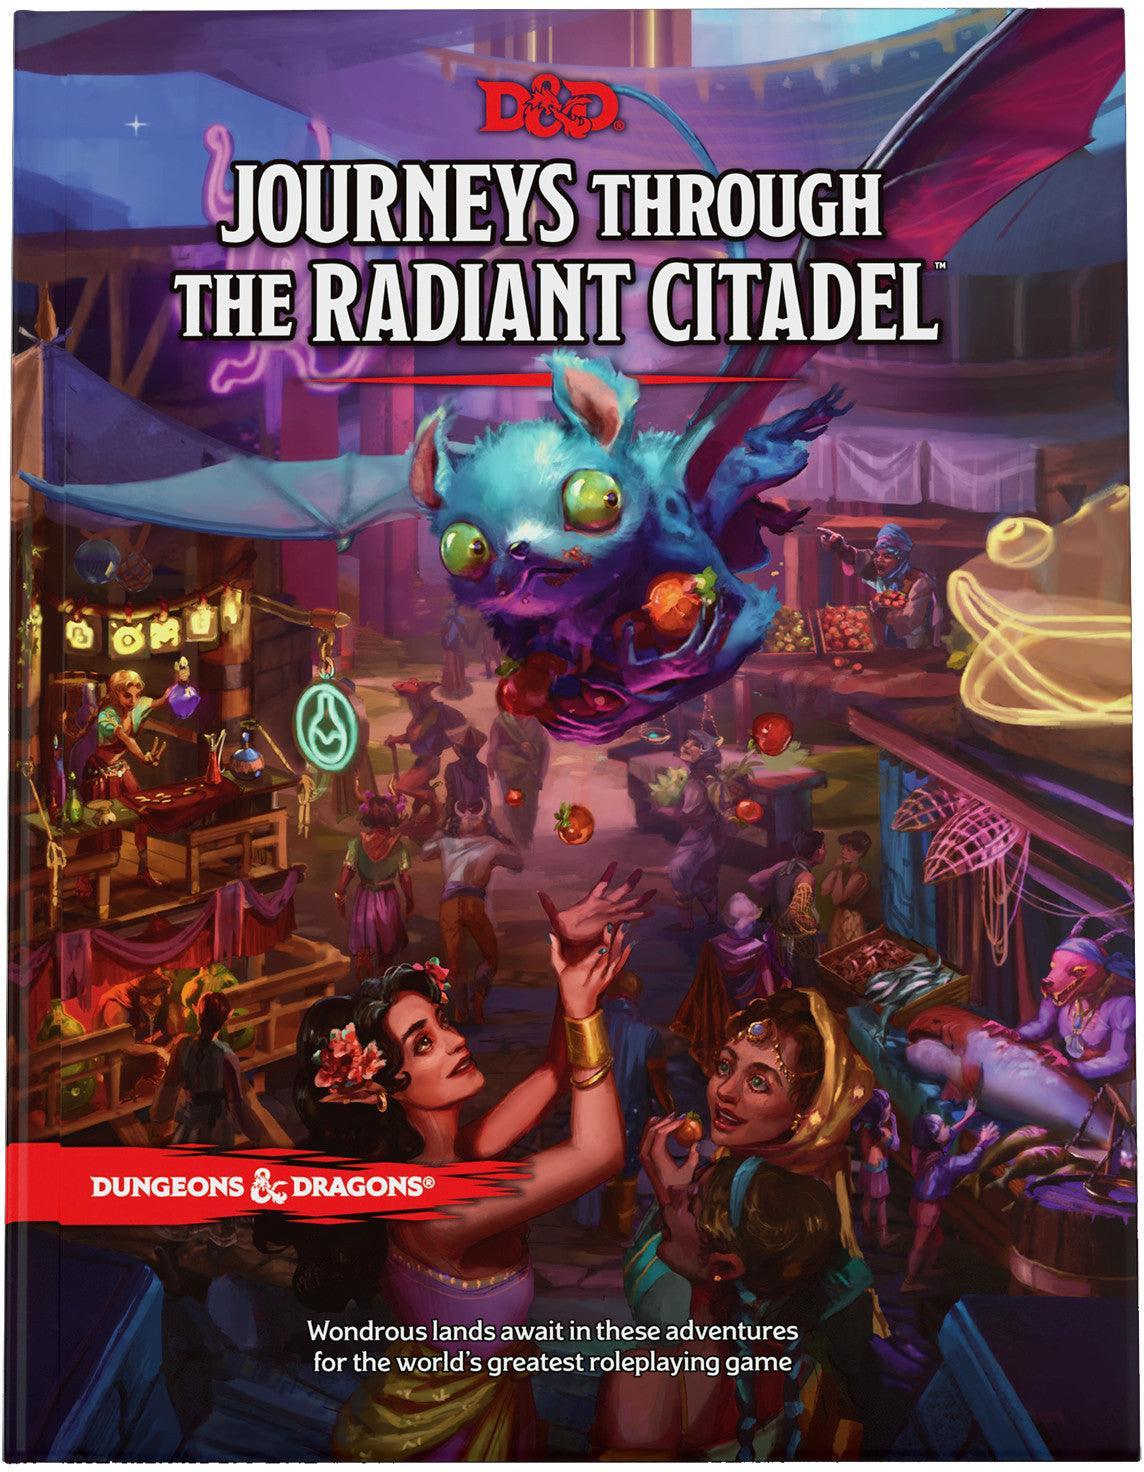 VR-98279 D&D Dungeons & Dragons Journeys Through the Radiant Citadel Hardcover - Wizards of the Coast - Titan Pop Culture